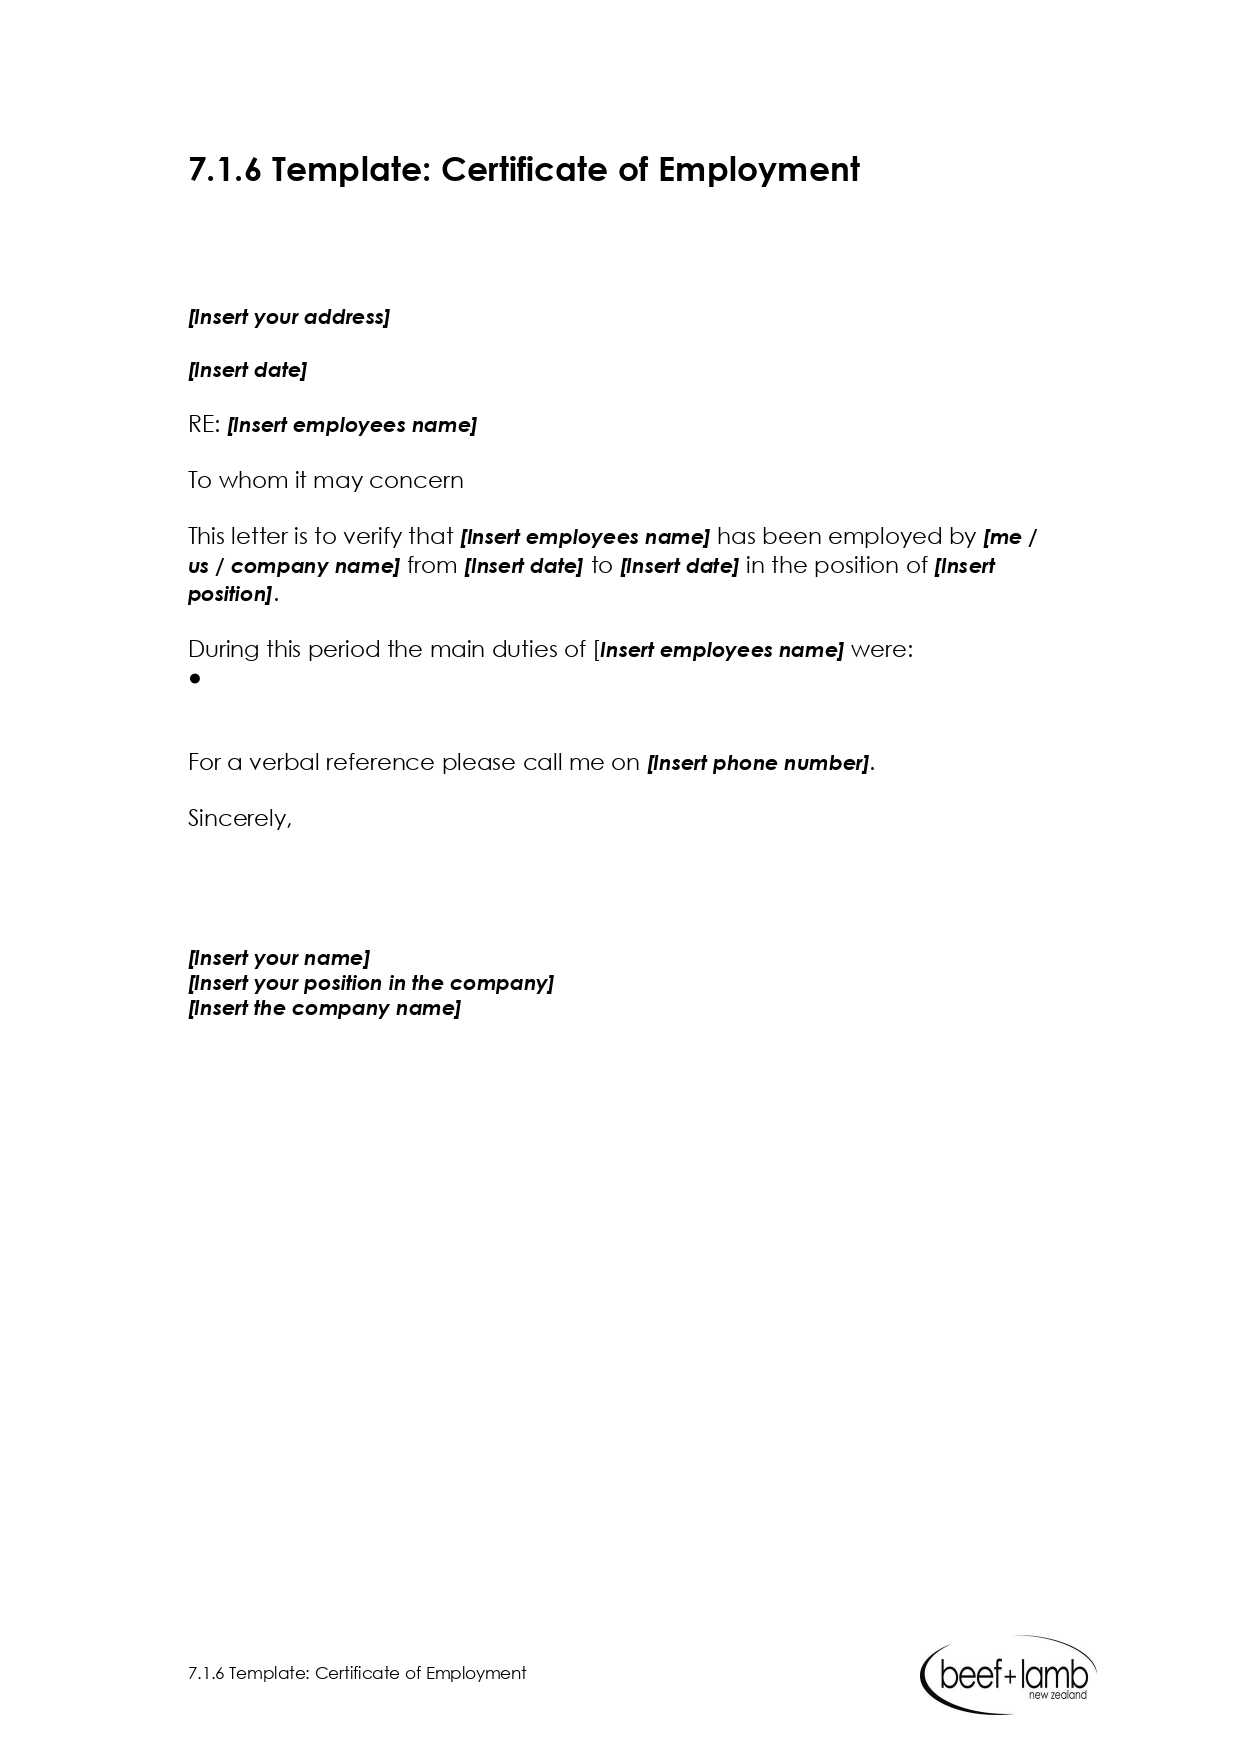 Editable Certificate Of Employment Template - Google Docs Within Employee Certificate Of Service Template